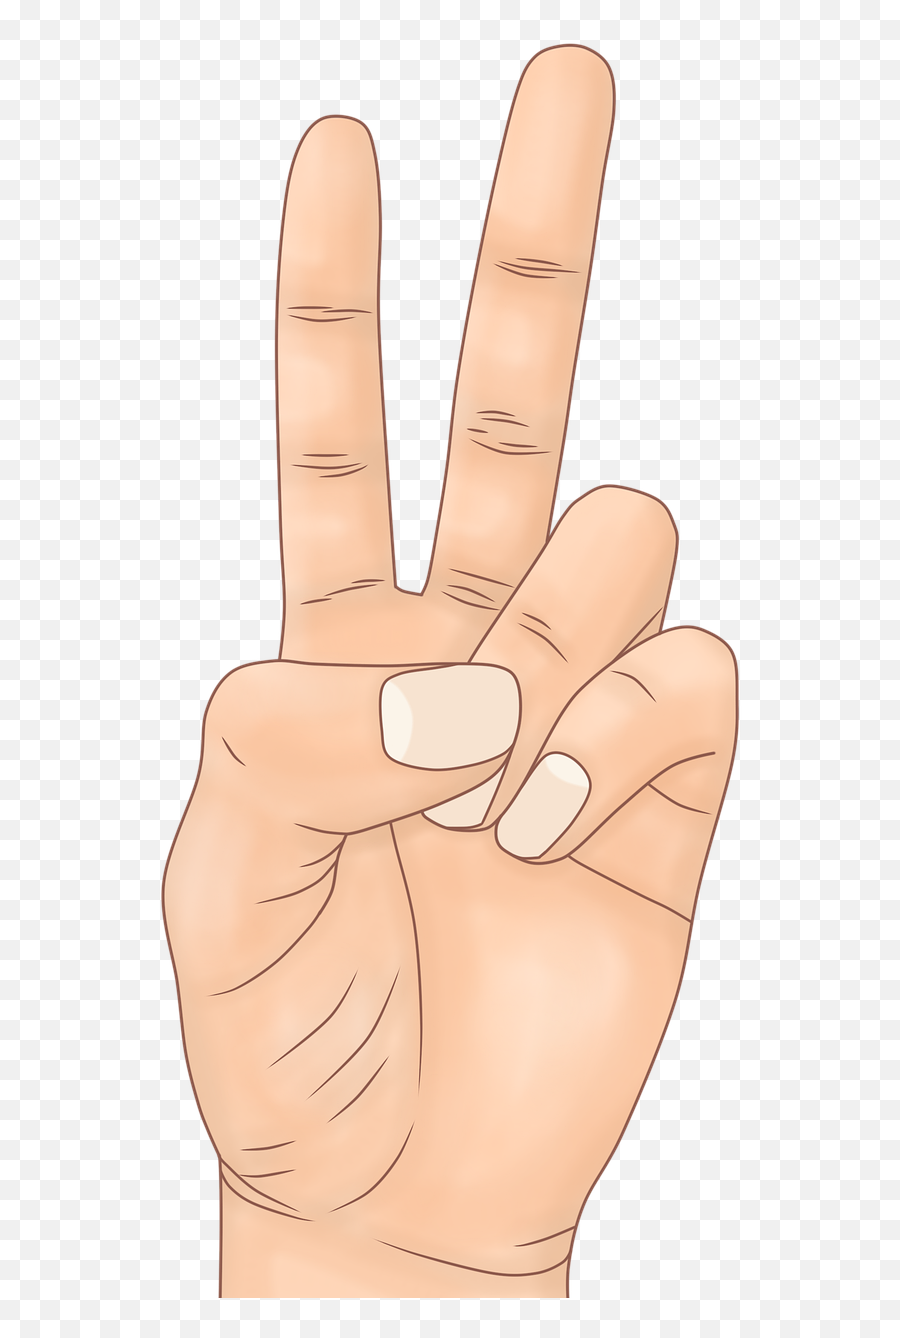 Hand Drawn Drawing Of - Free Image On Pixabay Mano Amor Y Paz Png,Peace Hand Sign Png